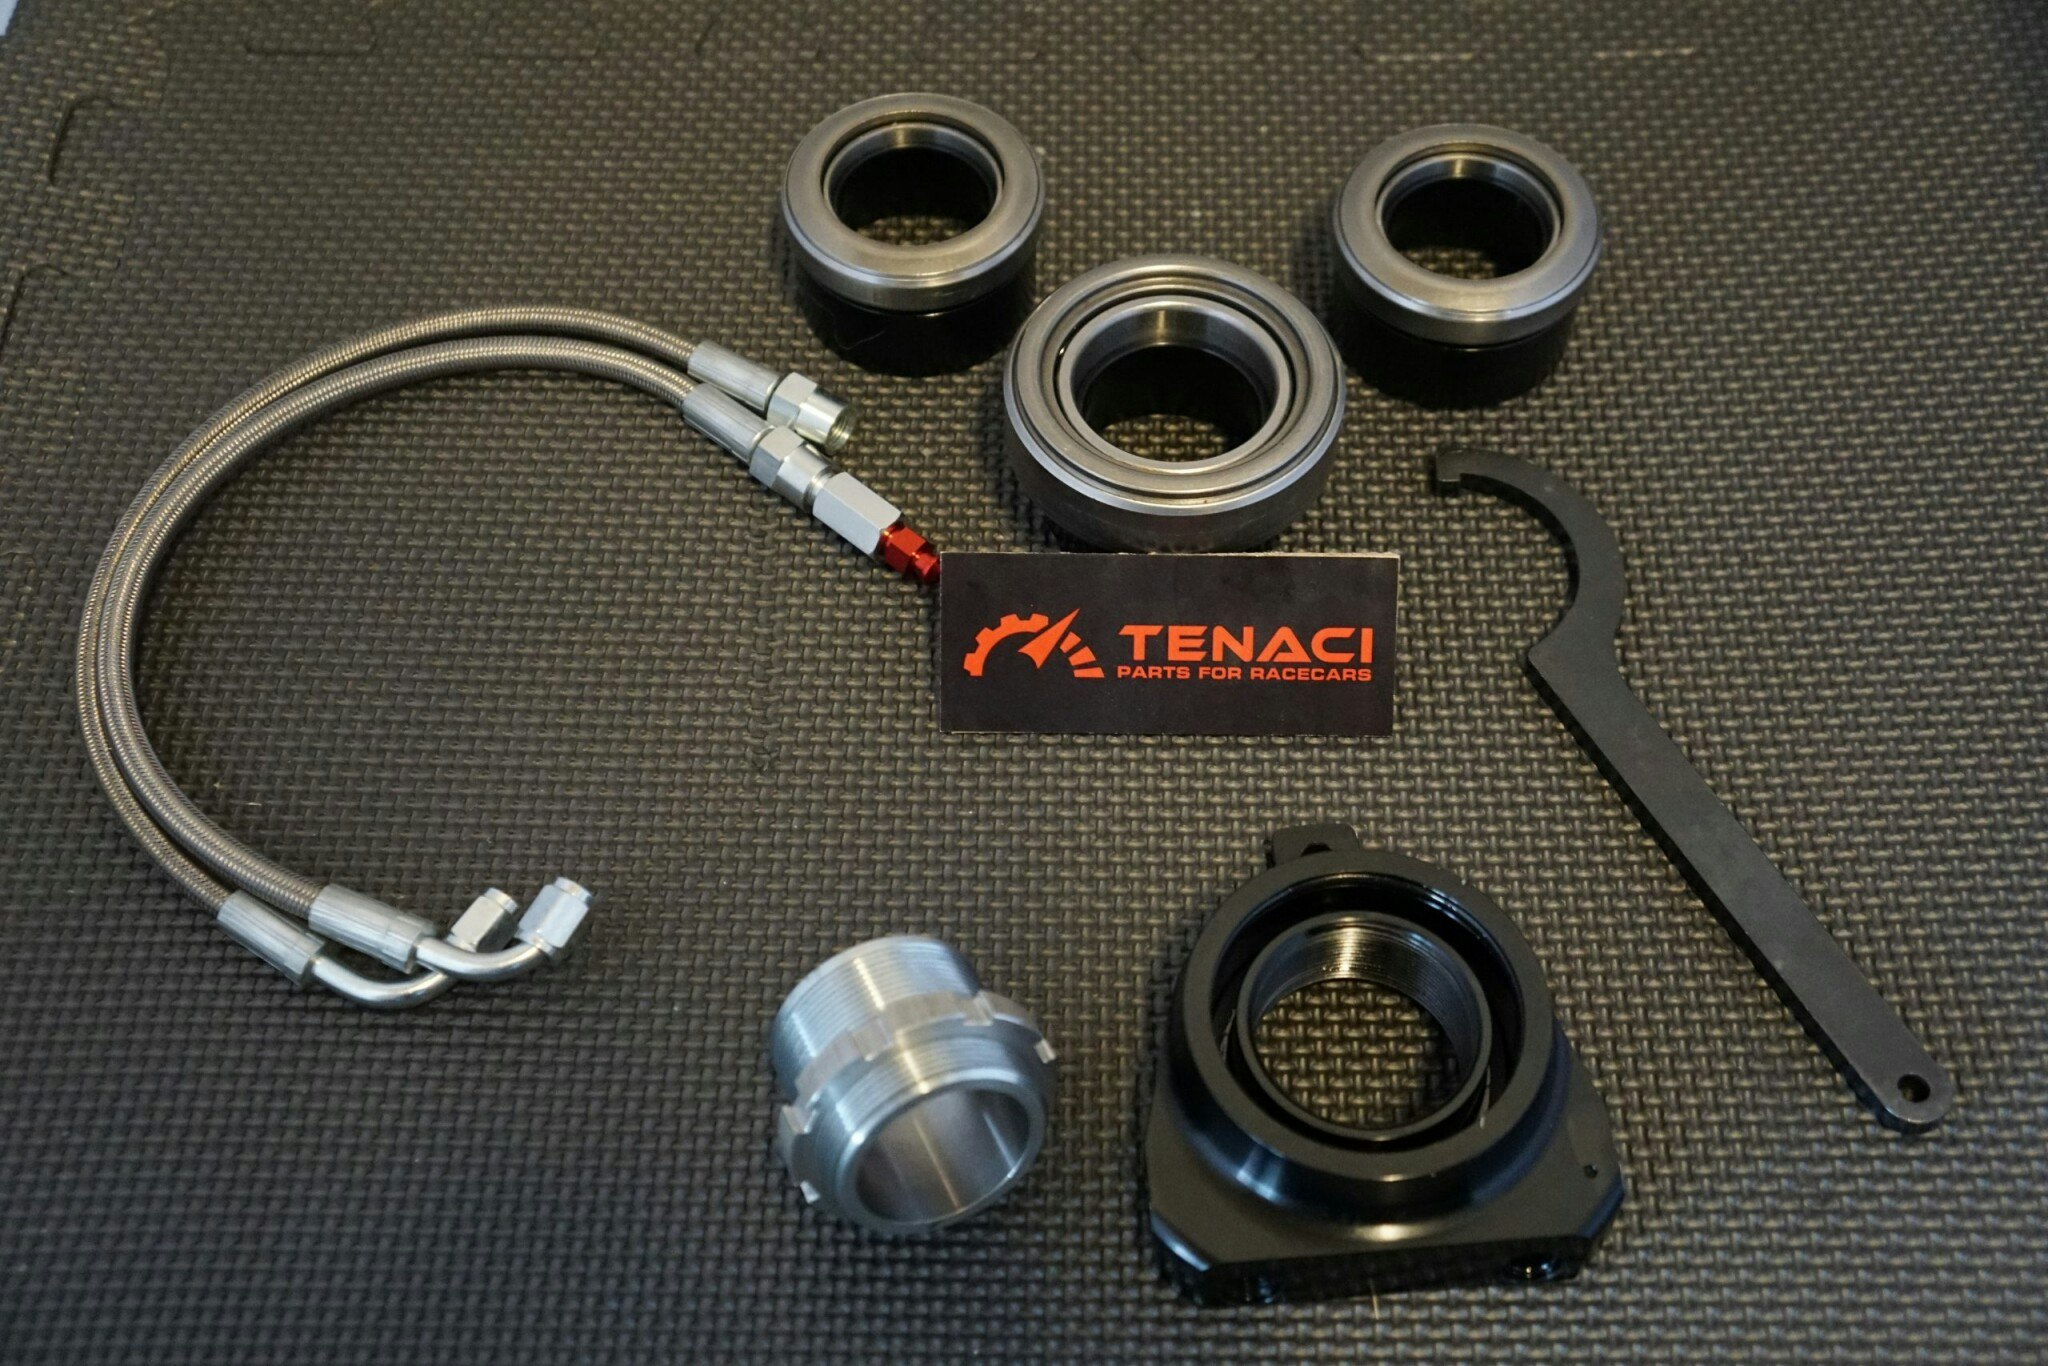 Tenaci Adjustable Hydraulic Clutch Release Bearing for Toyota and GM